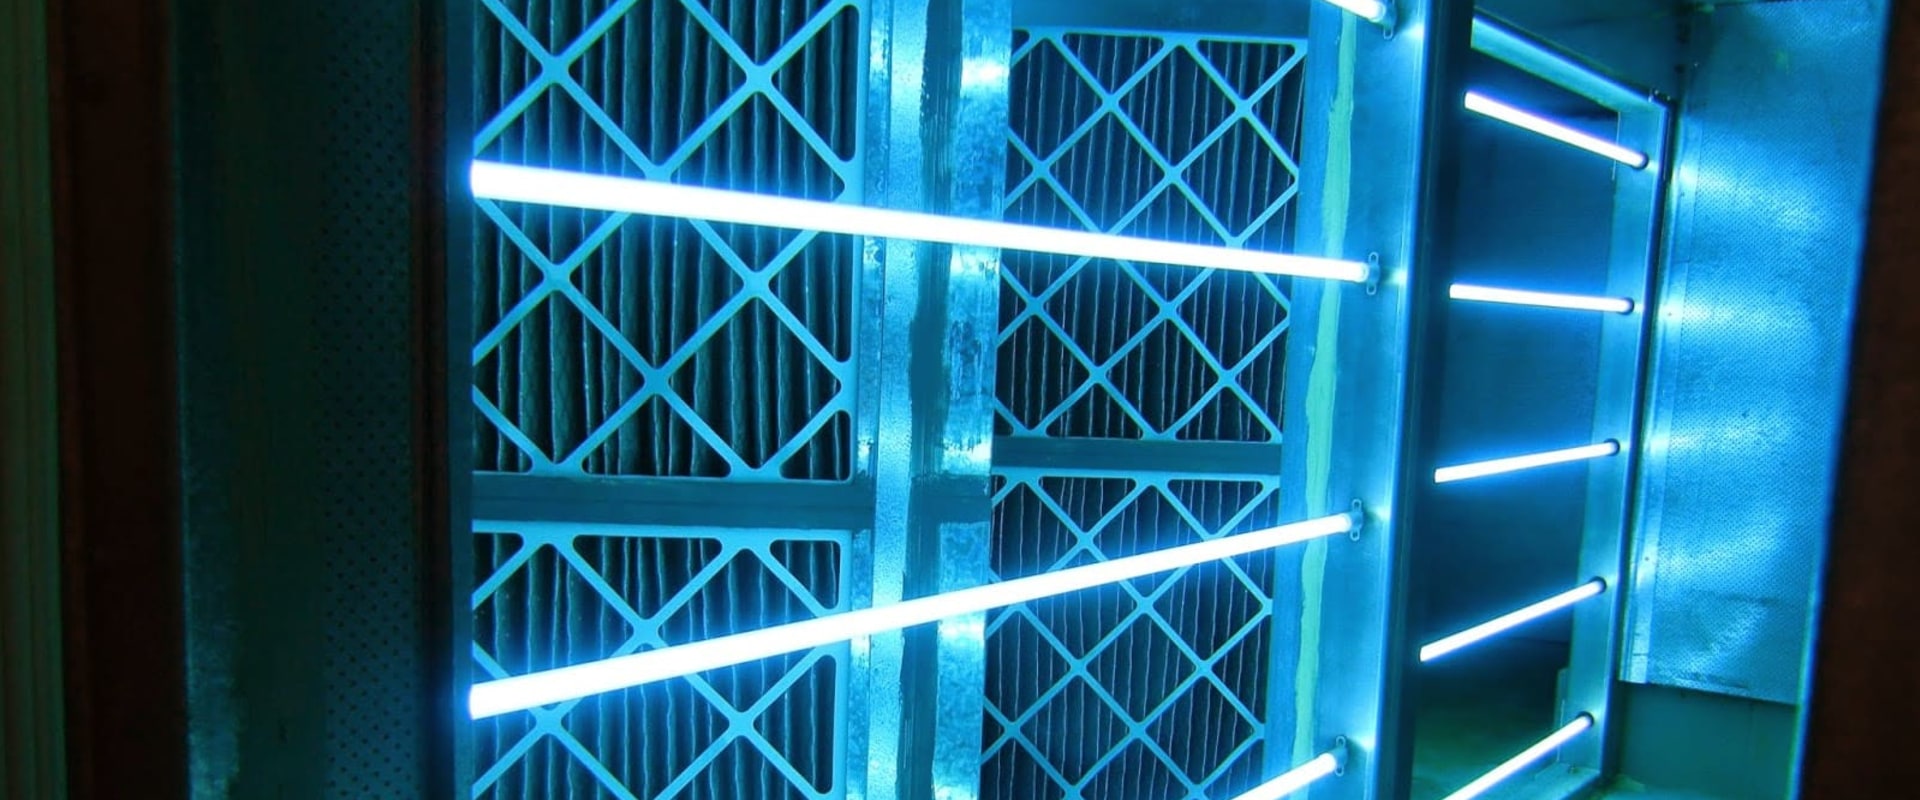 How to Install UV Lights for HVAC Systems in West Palm Beach, FL